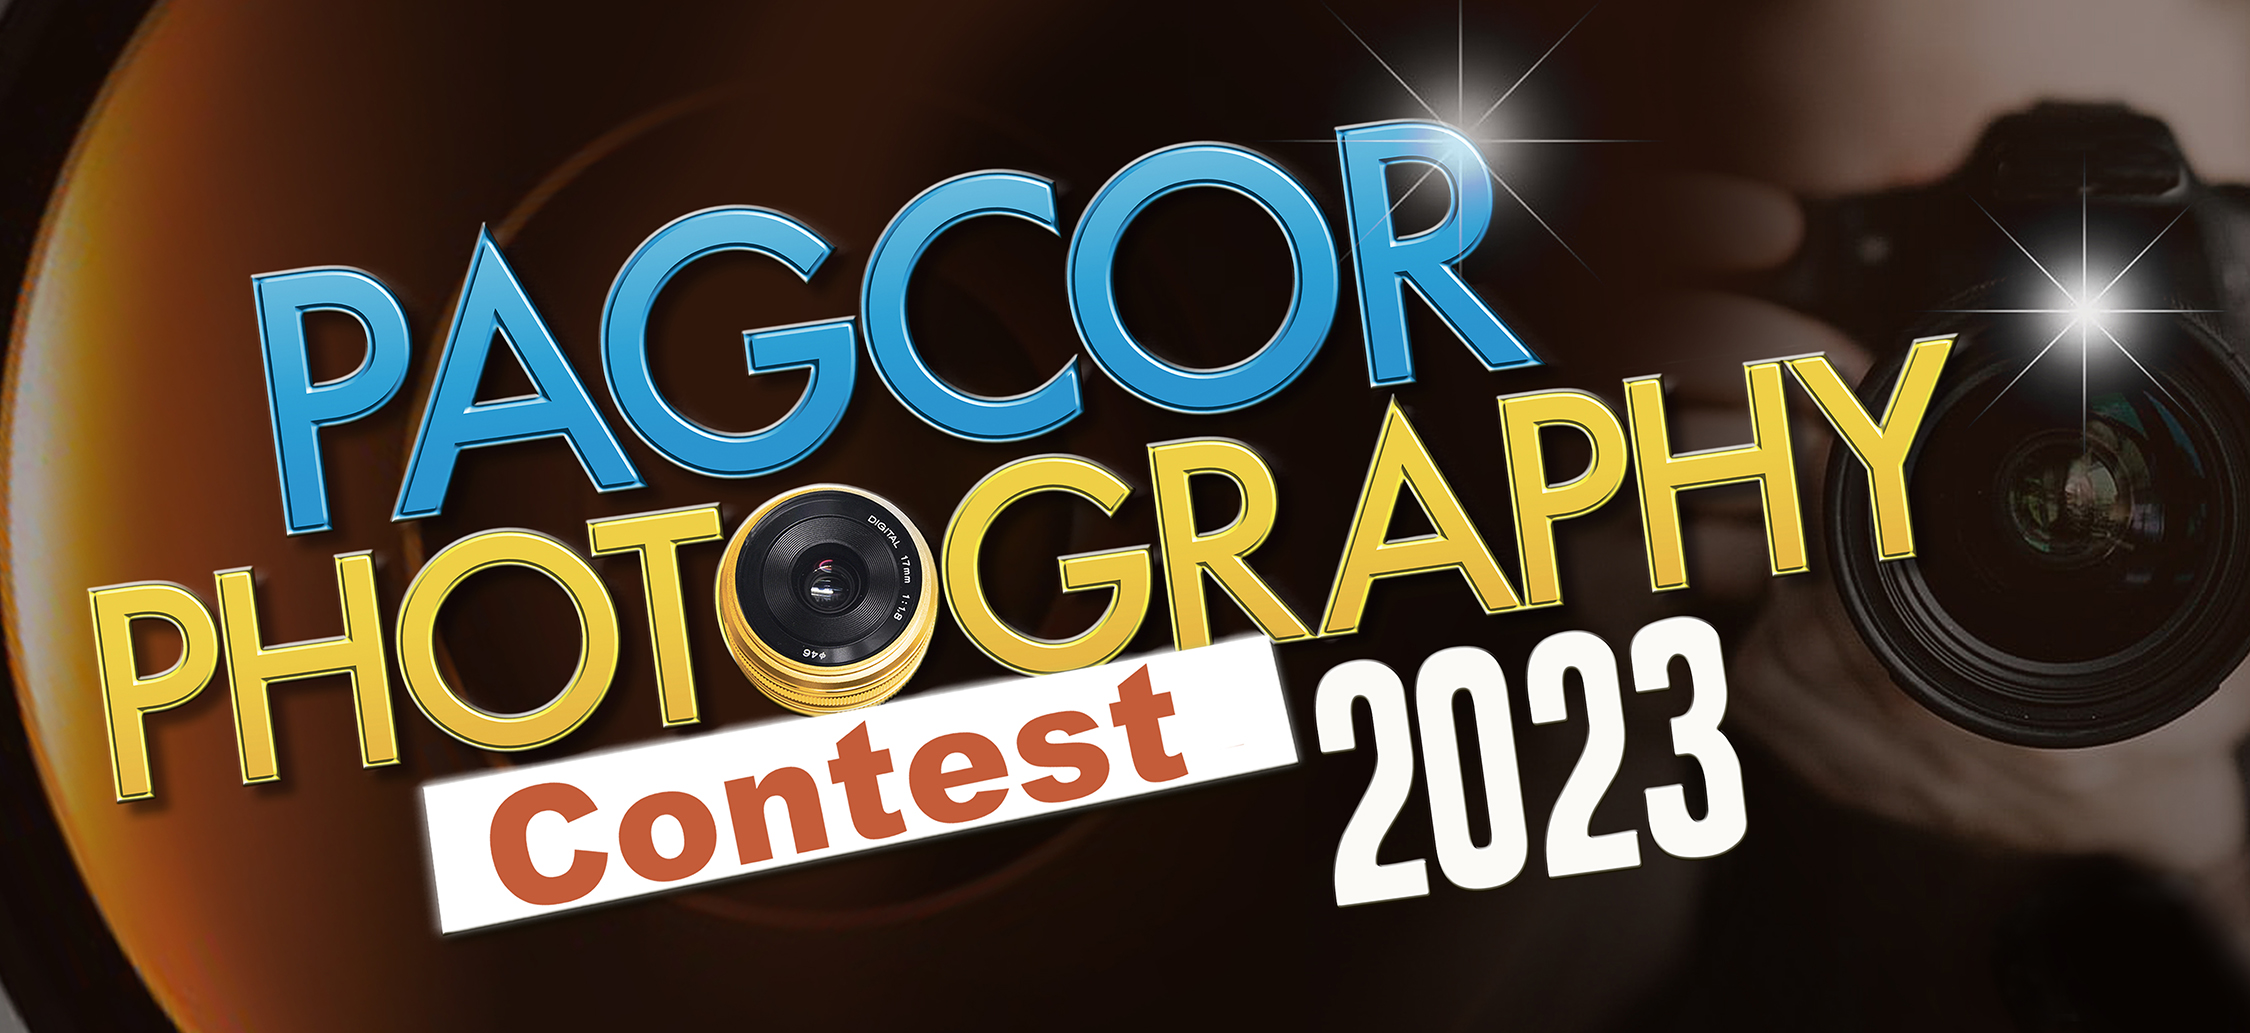 PAGCOR revives nationwide photography contest with over P1.6 million in cash prizes